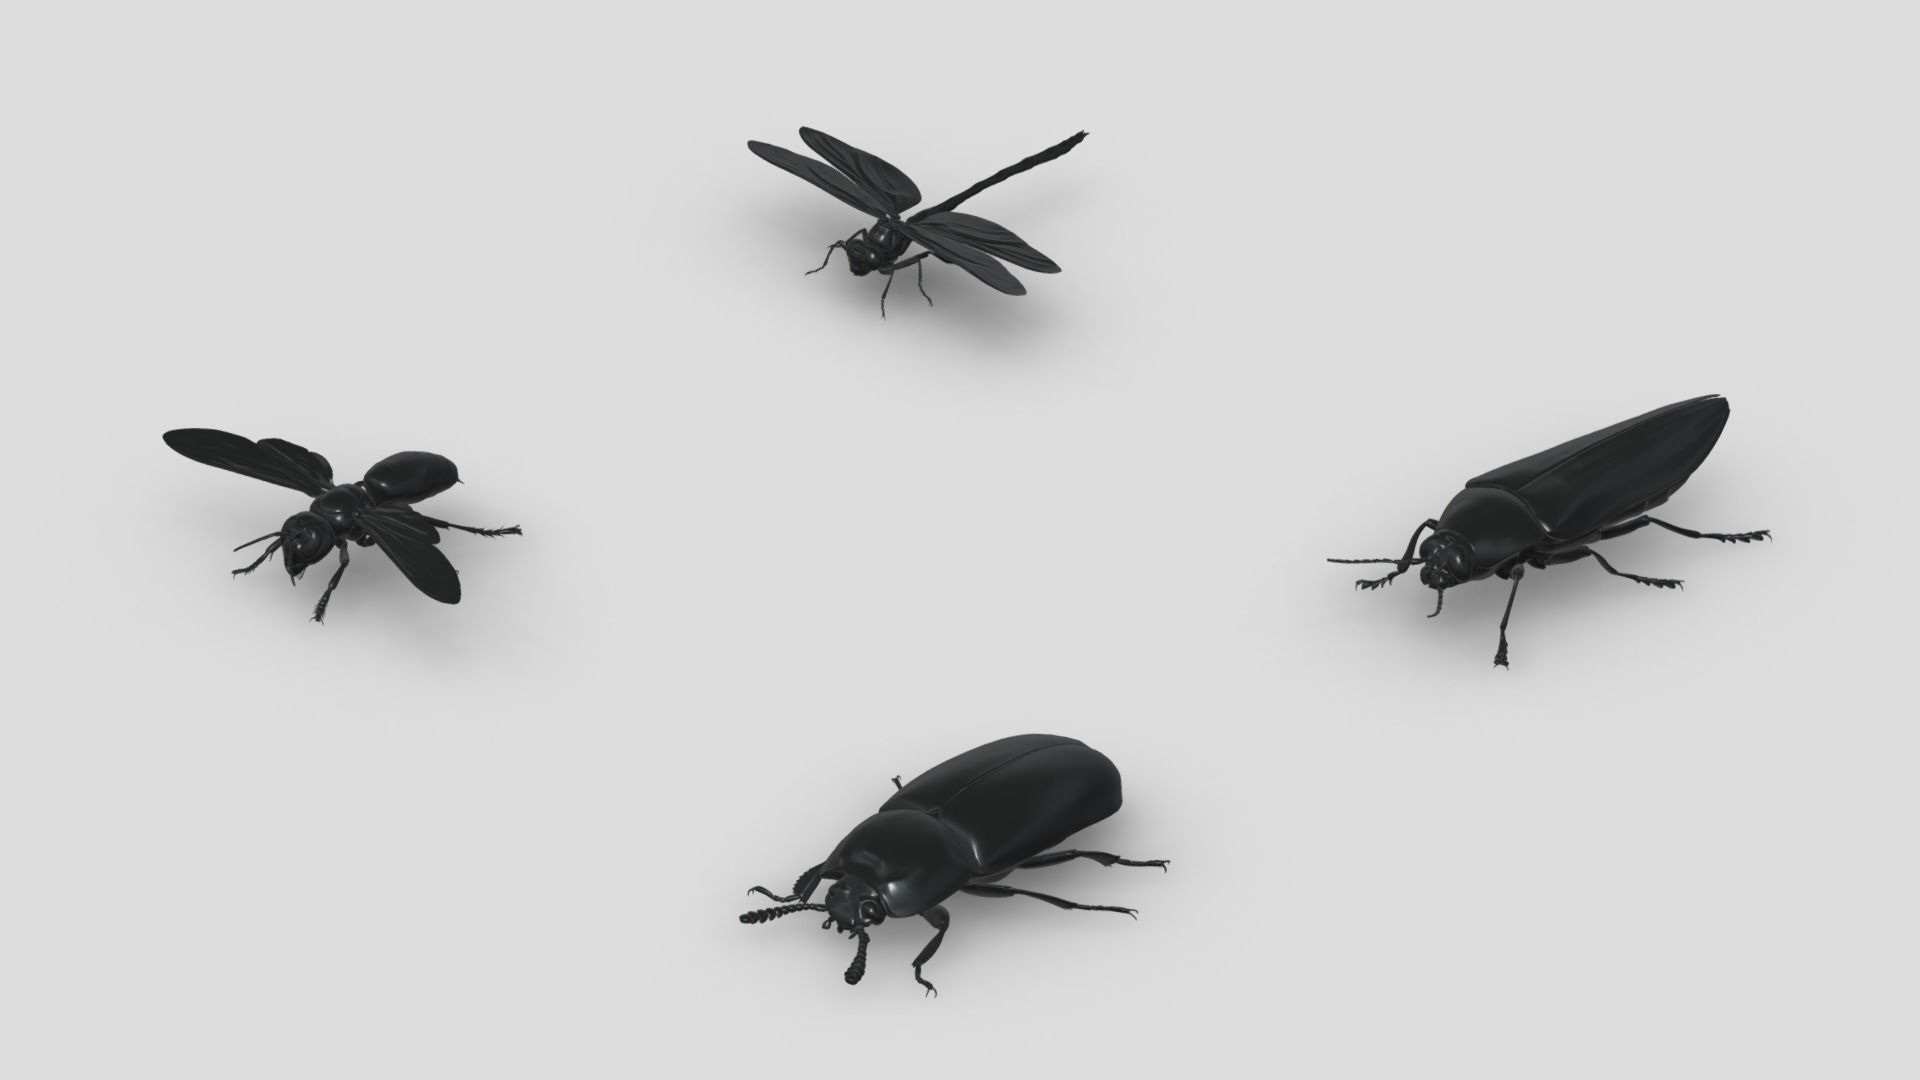 3D model Insects&beetles-pack11 - This is a 3D model of the Insects&beetles-pack11. The 3D model is about a group of black and white helicopters.